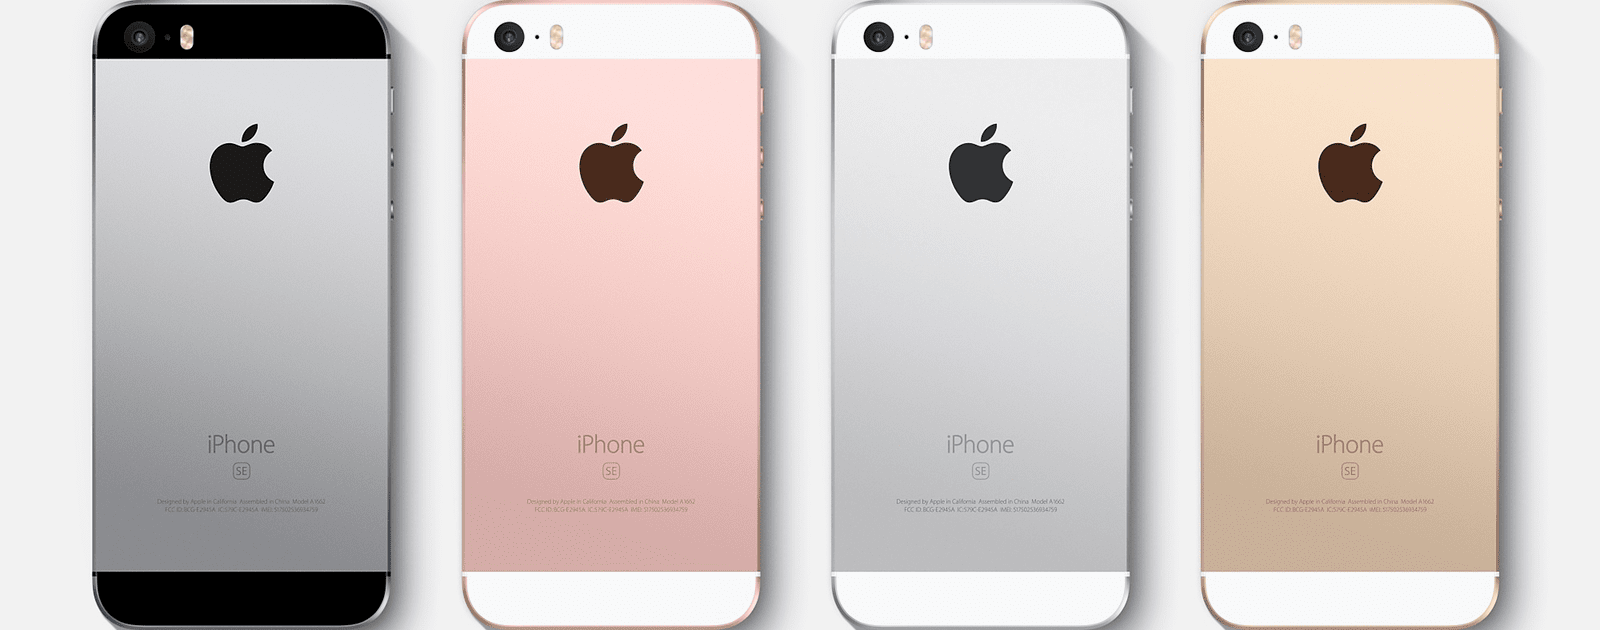 European Filing Shows the iPhone SE 2 Might be Coming After All